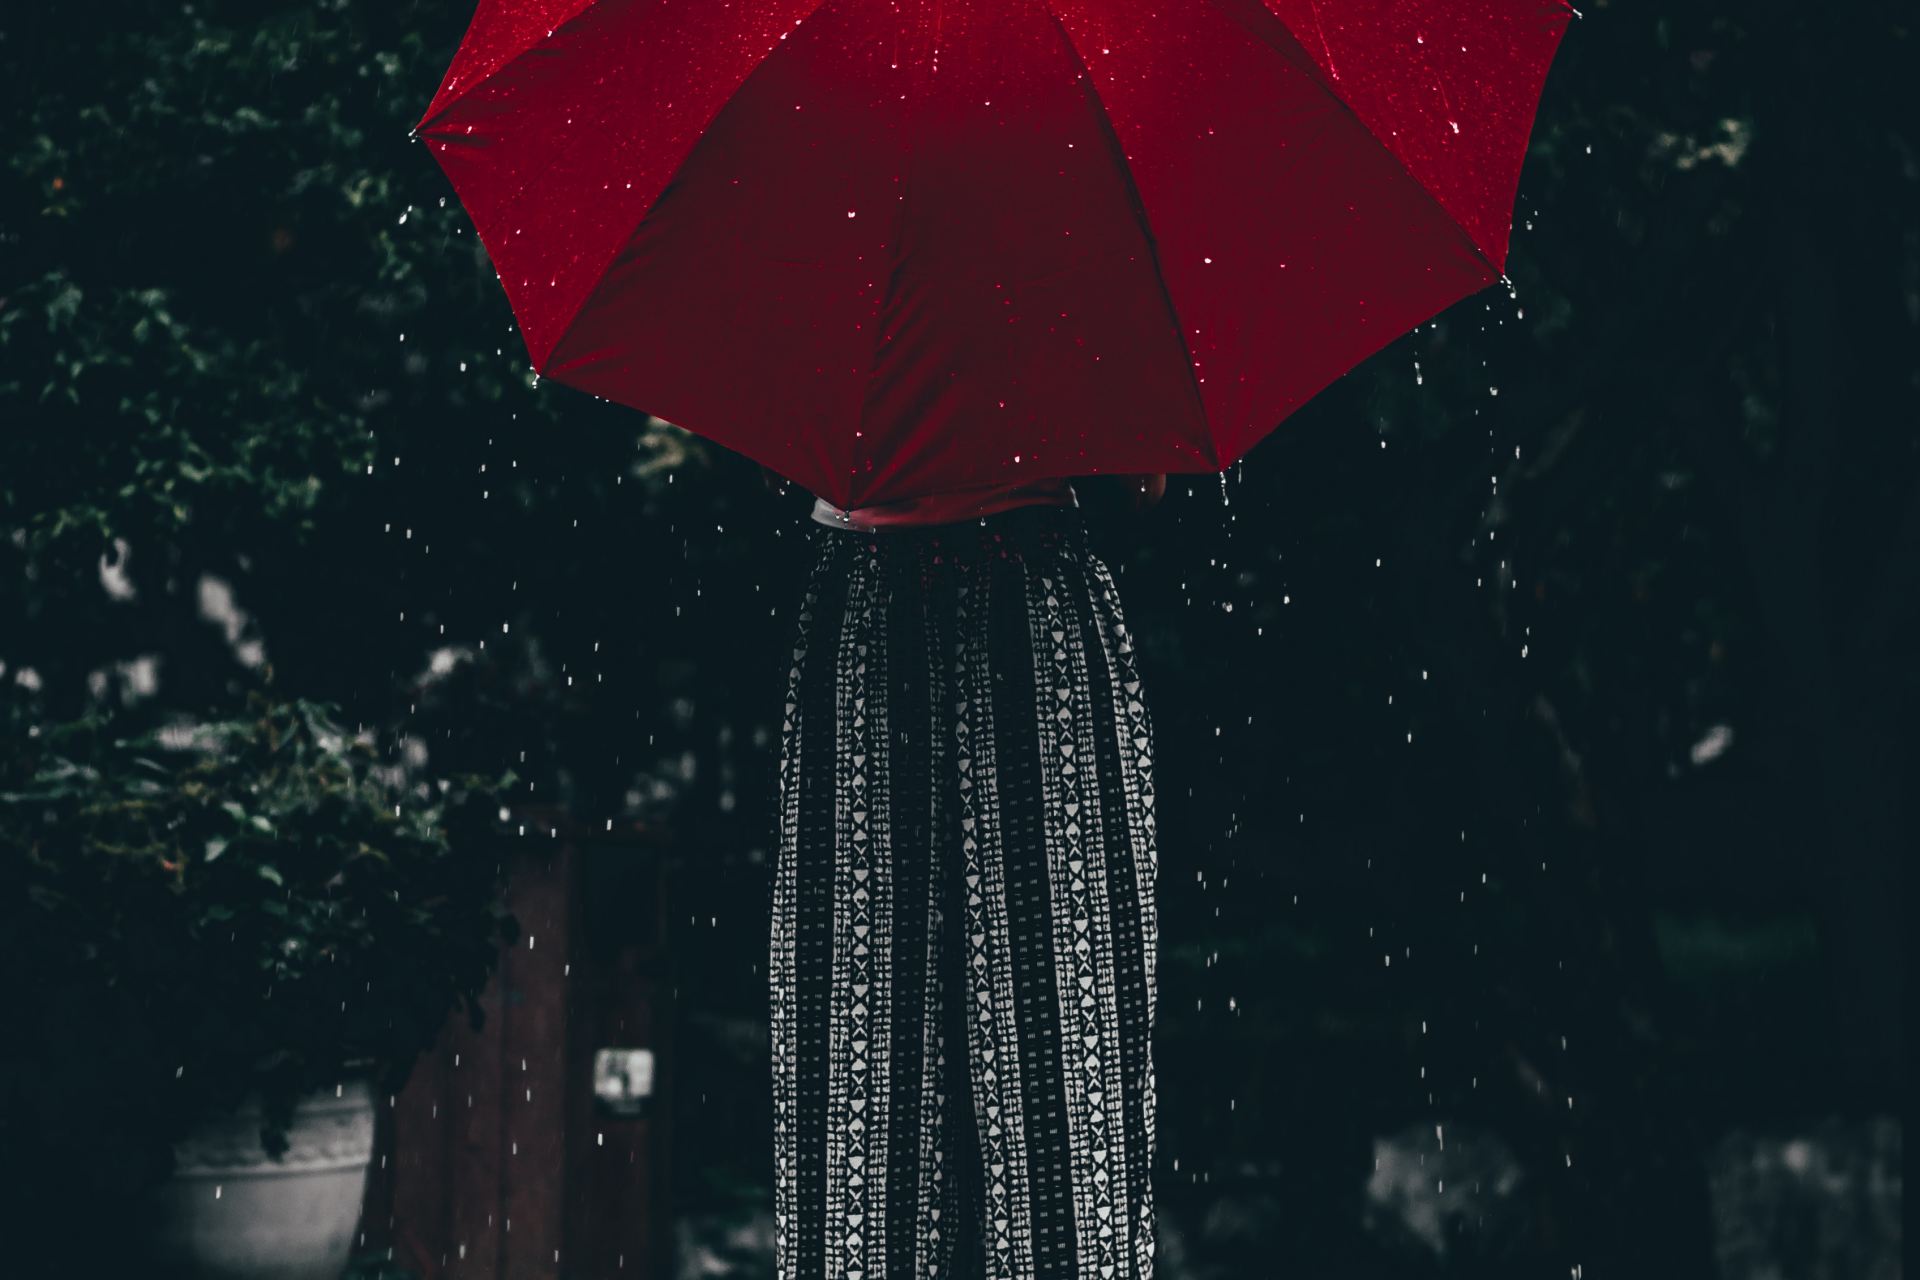 woman holding red umbrella standing near tree at daytime